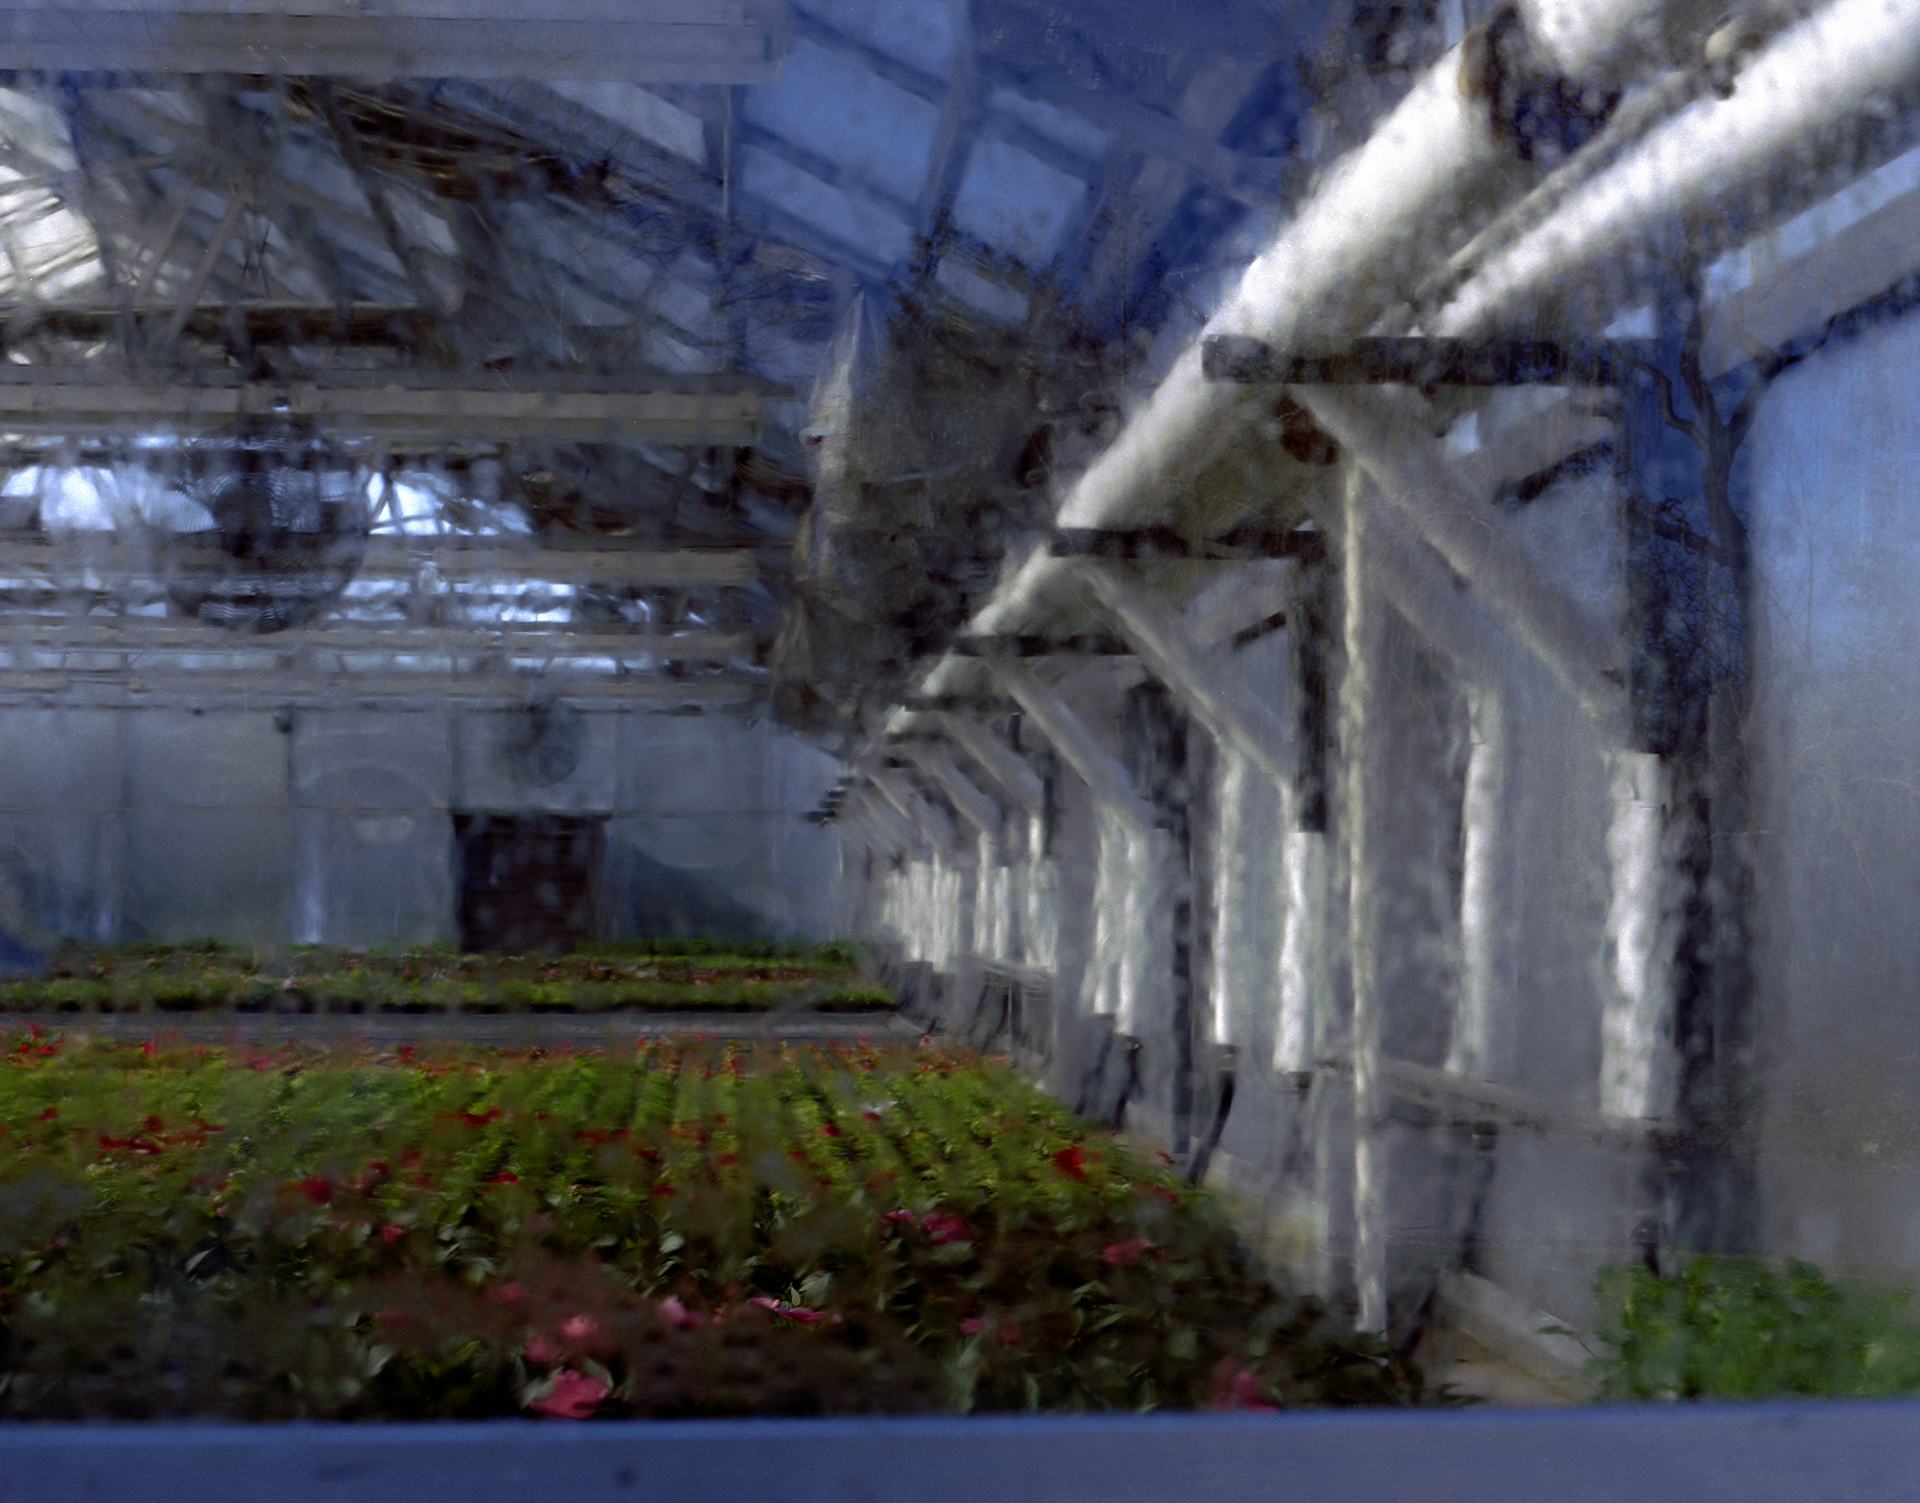 Wide shot of a bunch of red flowers in a greenhouse with condensation on the windows.